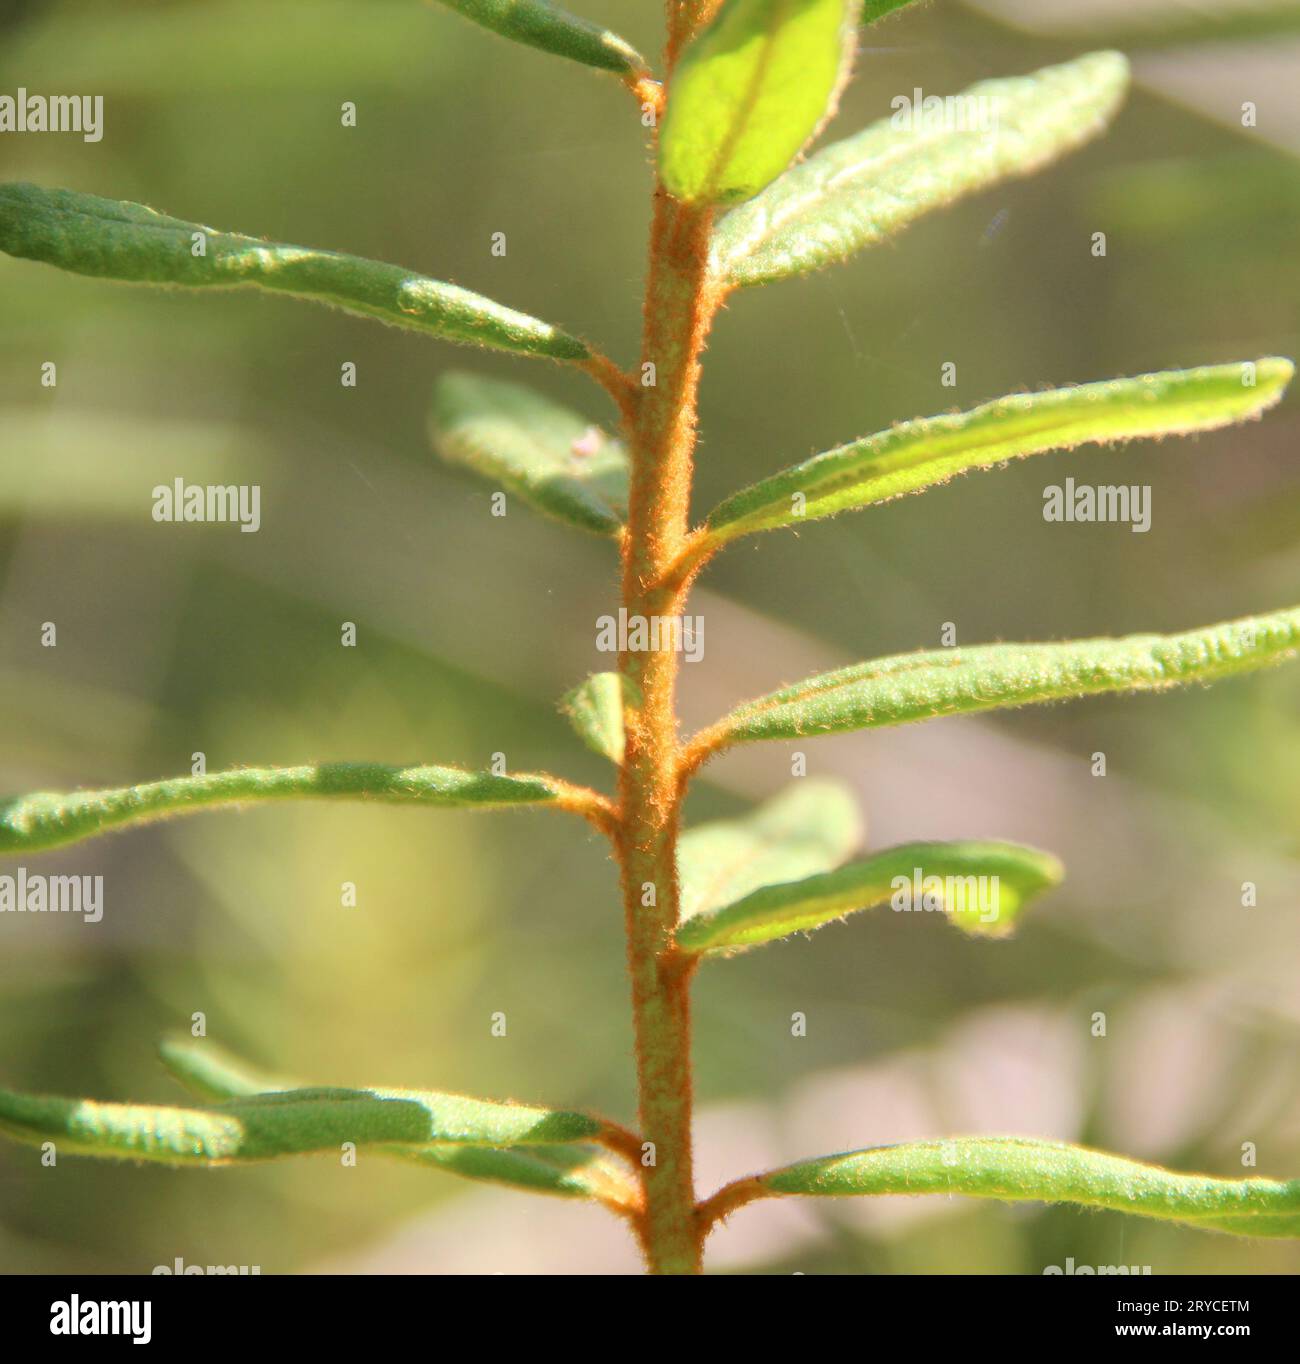 Ledum palustre plant in forest, close up view Stock Photo